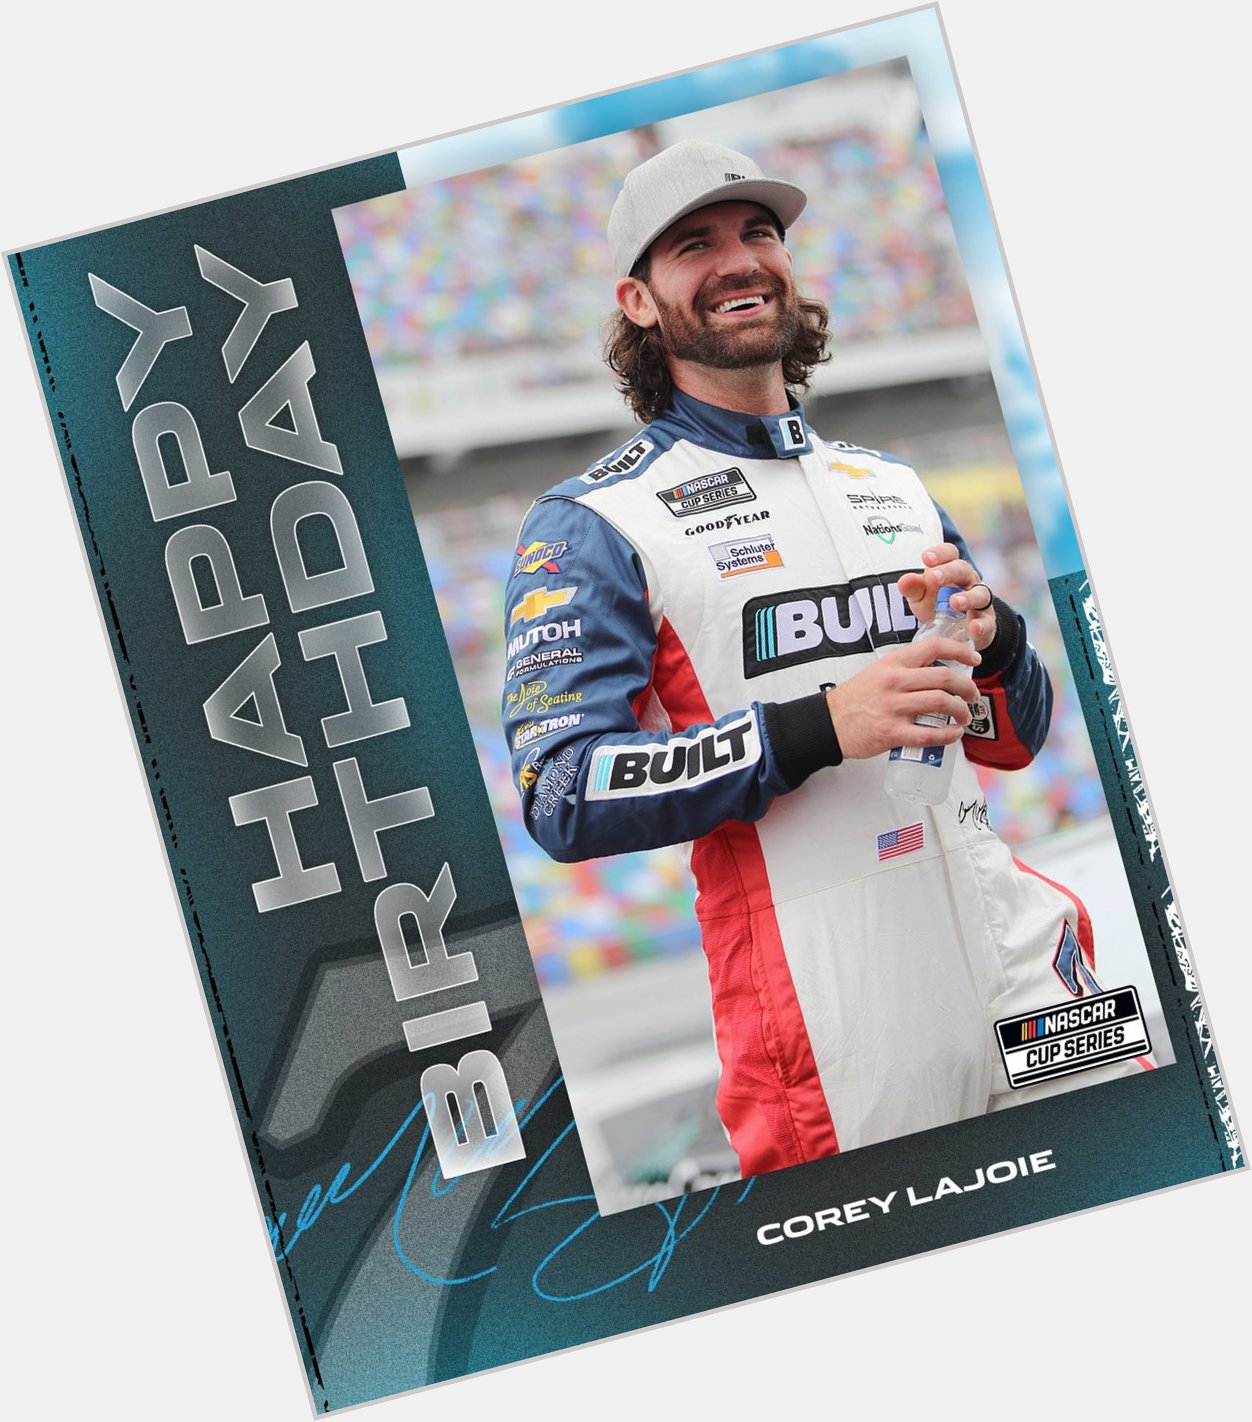 Today is his day! Remessage to wish Corey  LaJoie a very happy birthday!  